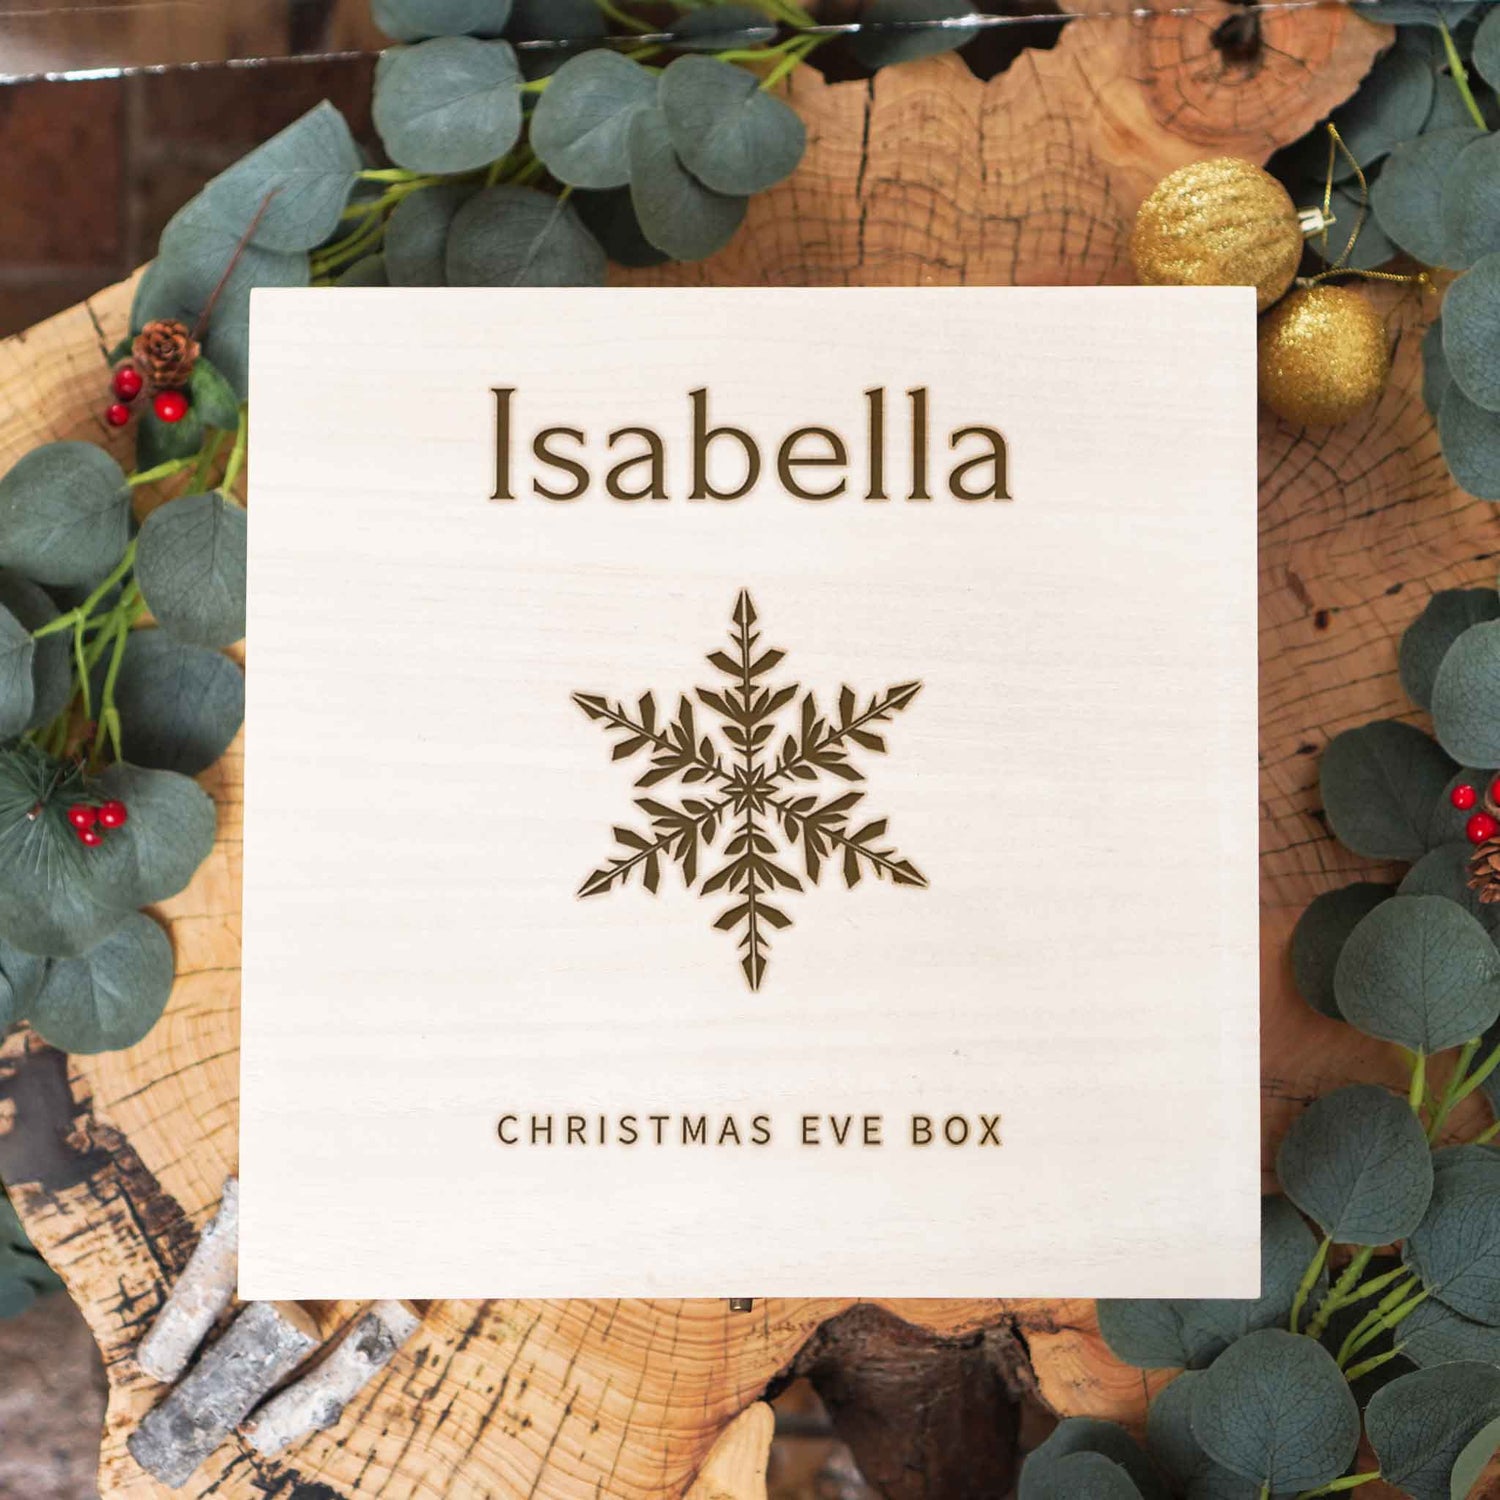 Personalised Christmas Eve Box with Snowflake